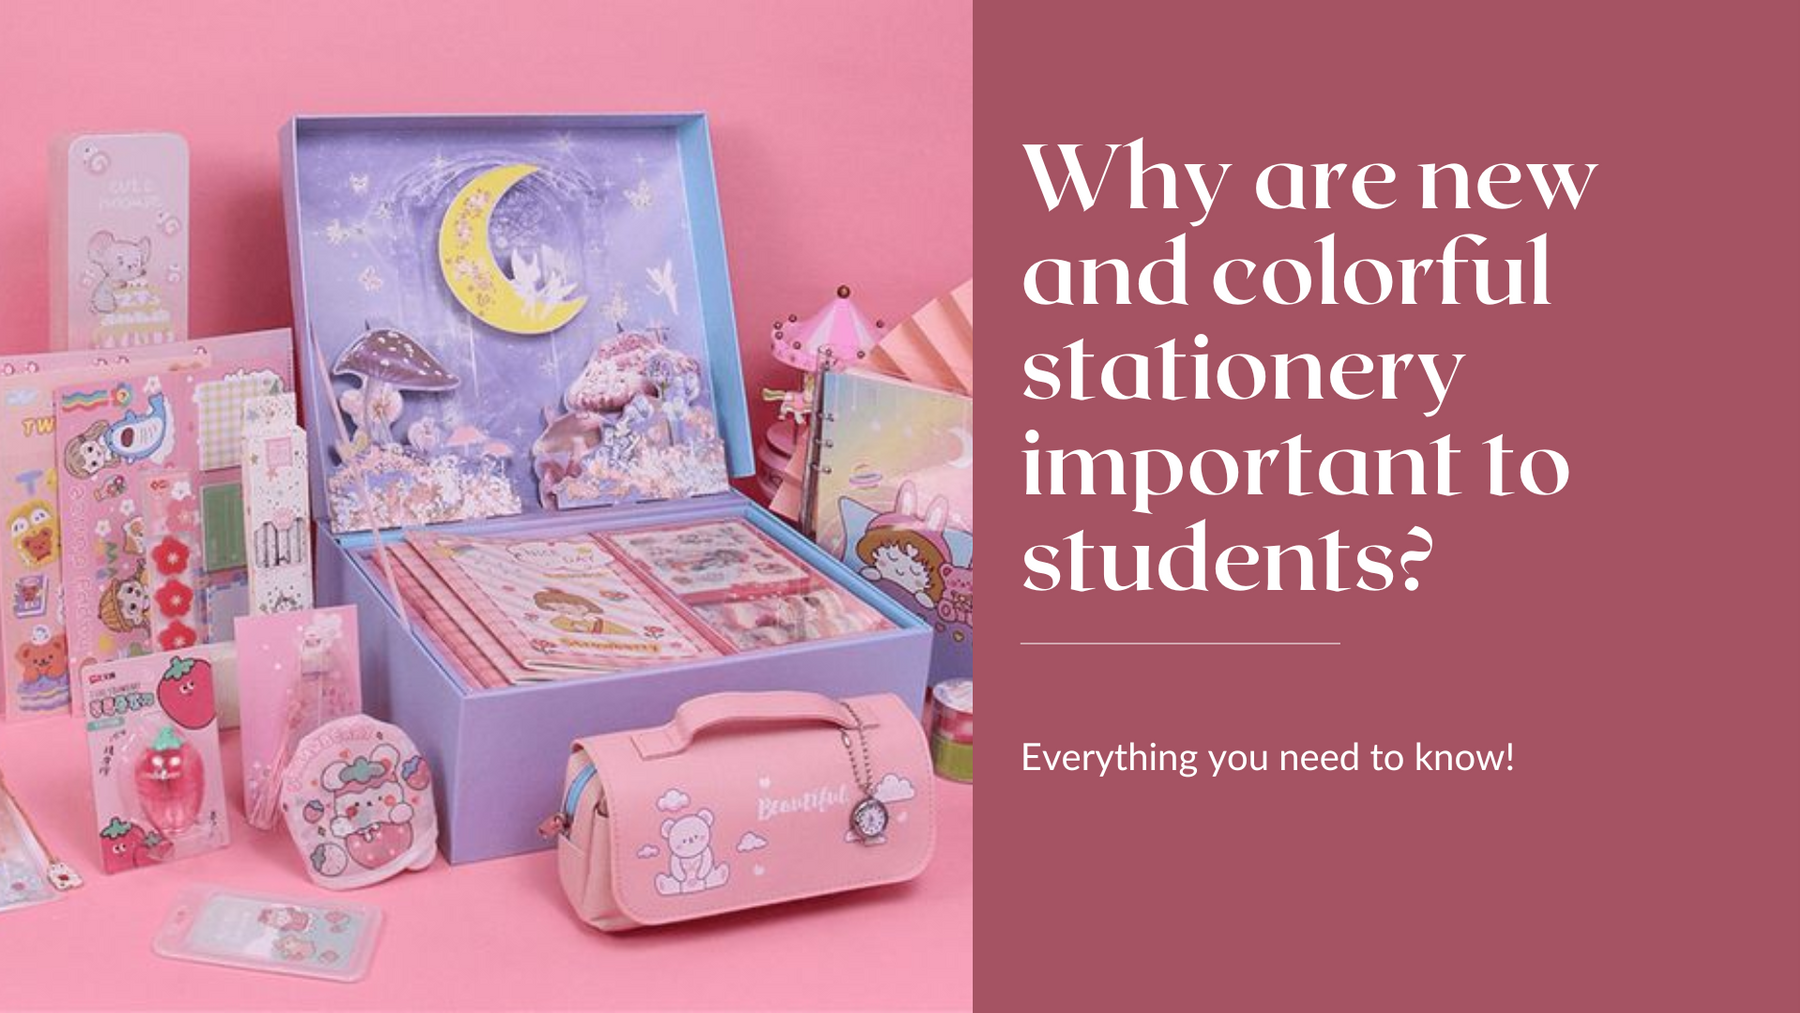 Why are New and Colorful Stationery Important to Students?